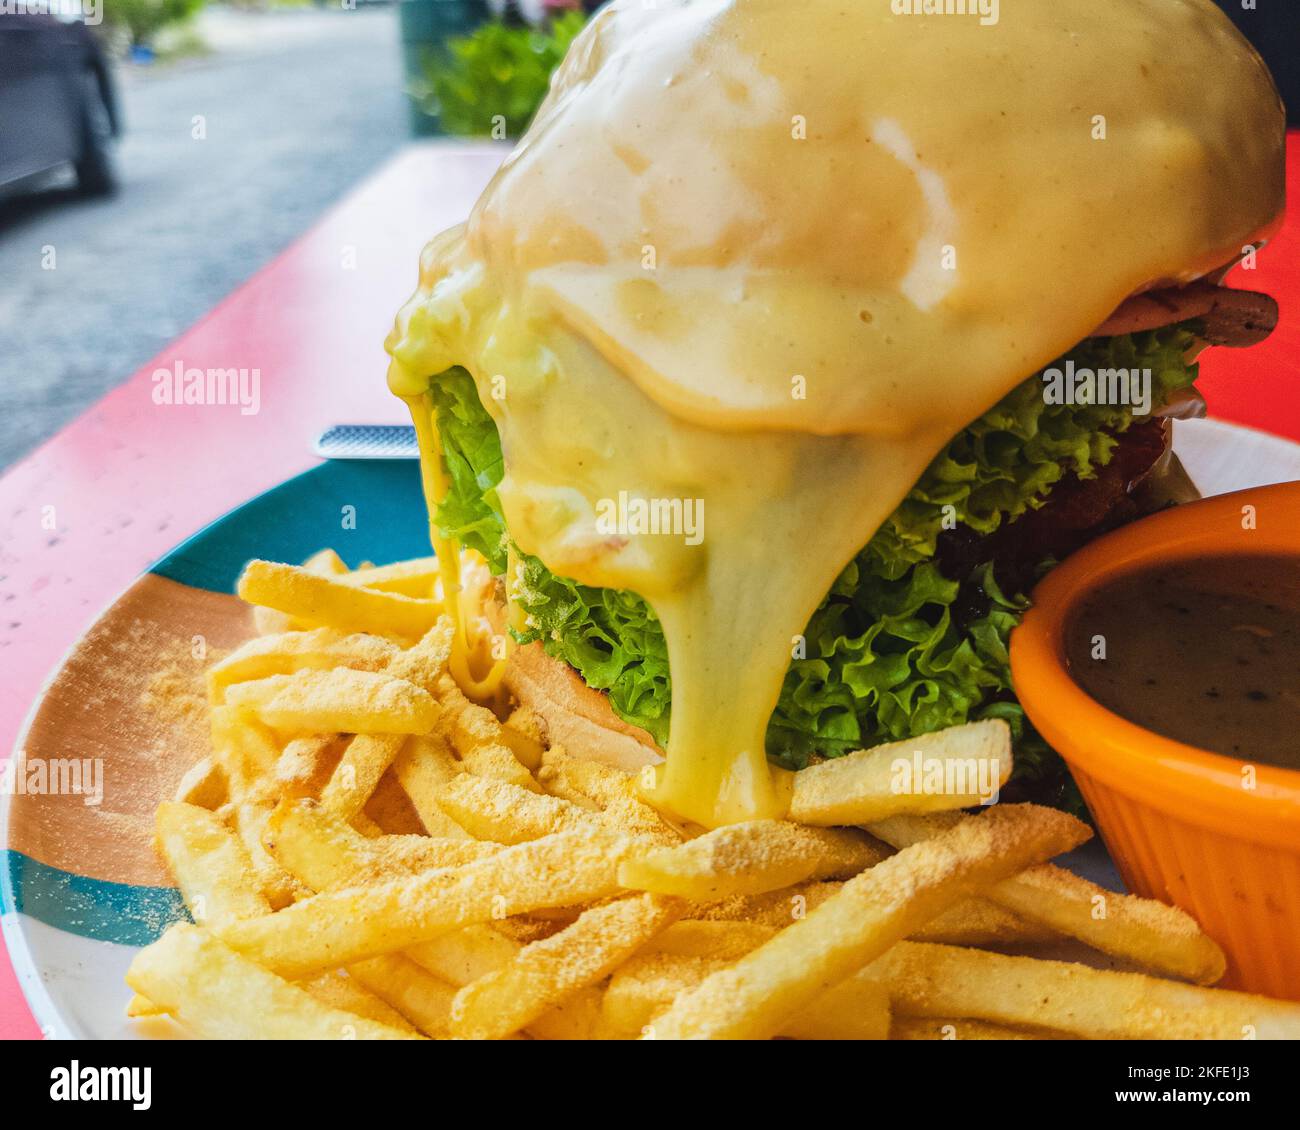 Beef cheeseburger with melted cheese served with black pepper sauce and fries. Stock Photo